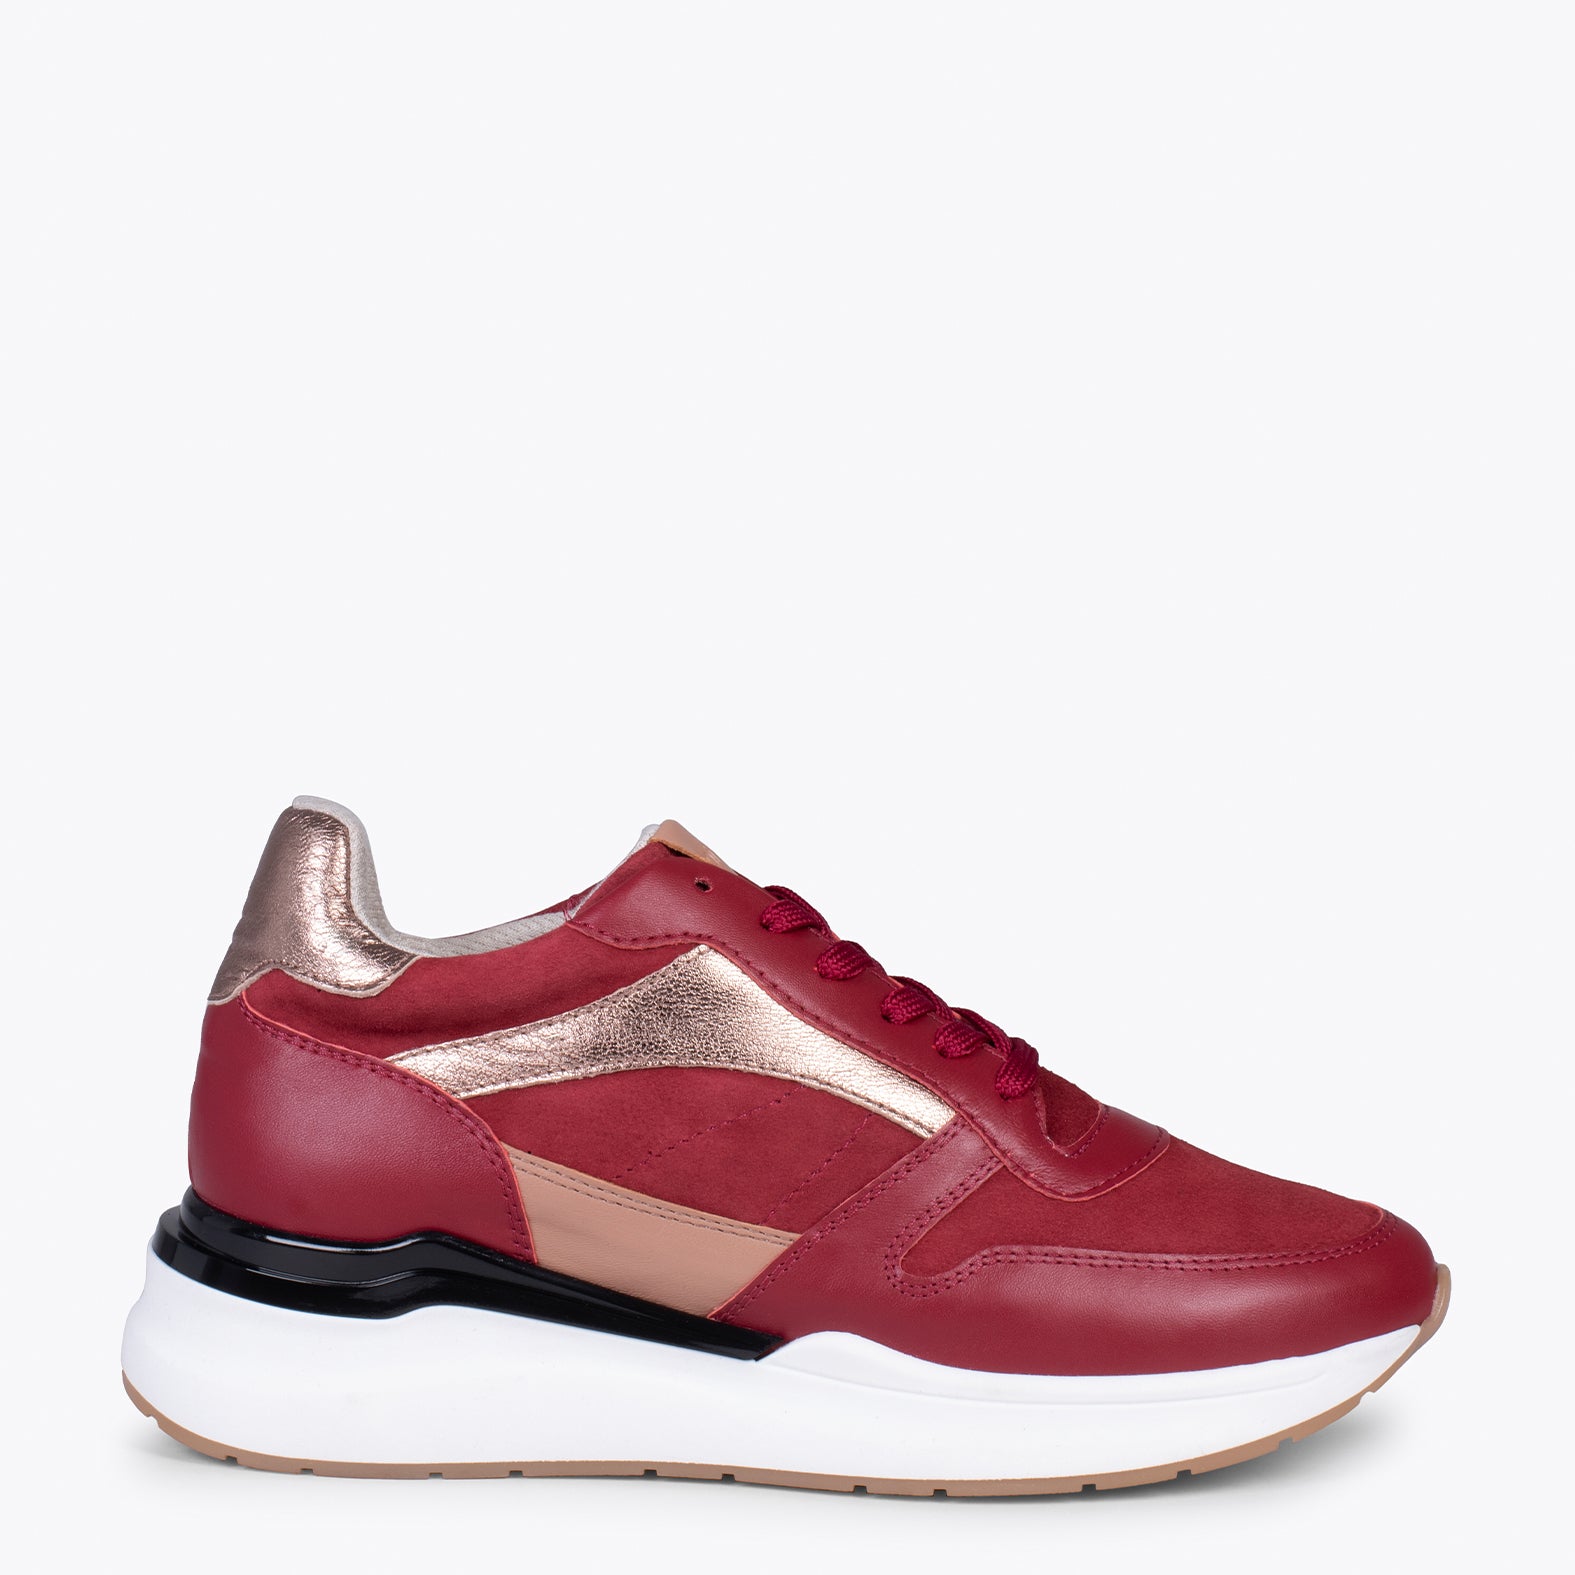 FREEDOM – BURGUNDY sneakers with removable insole